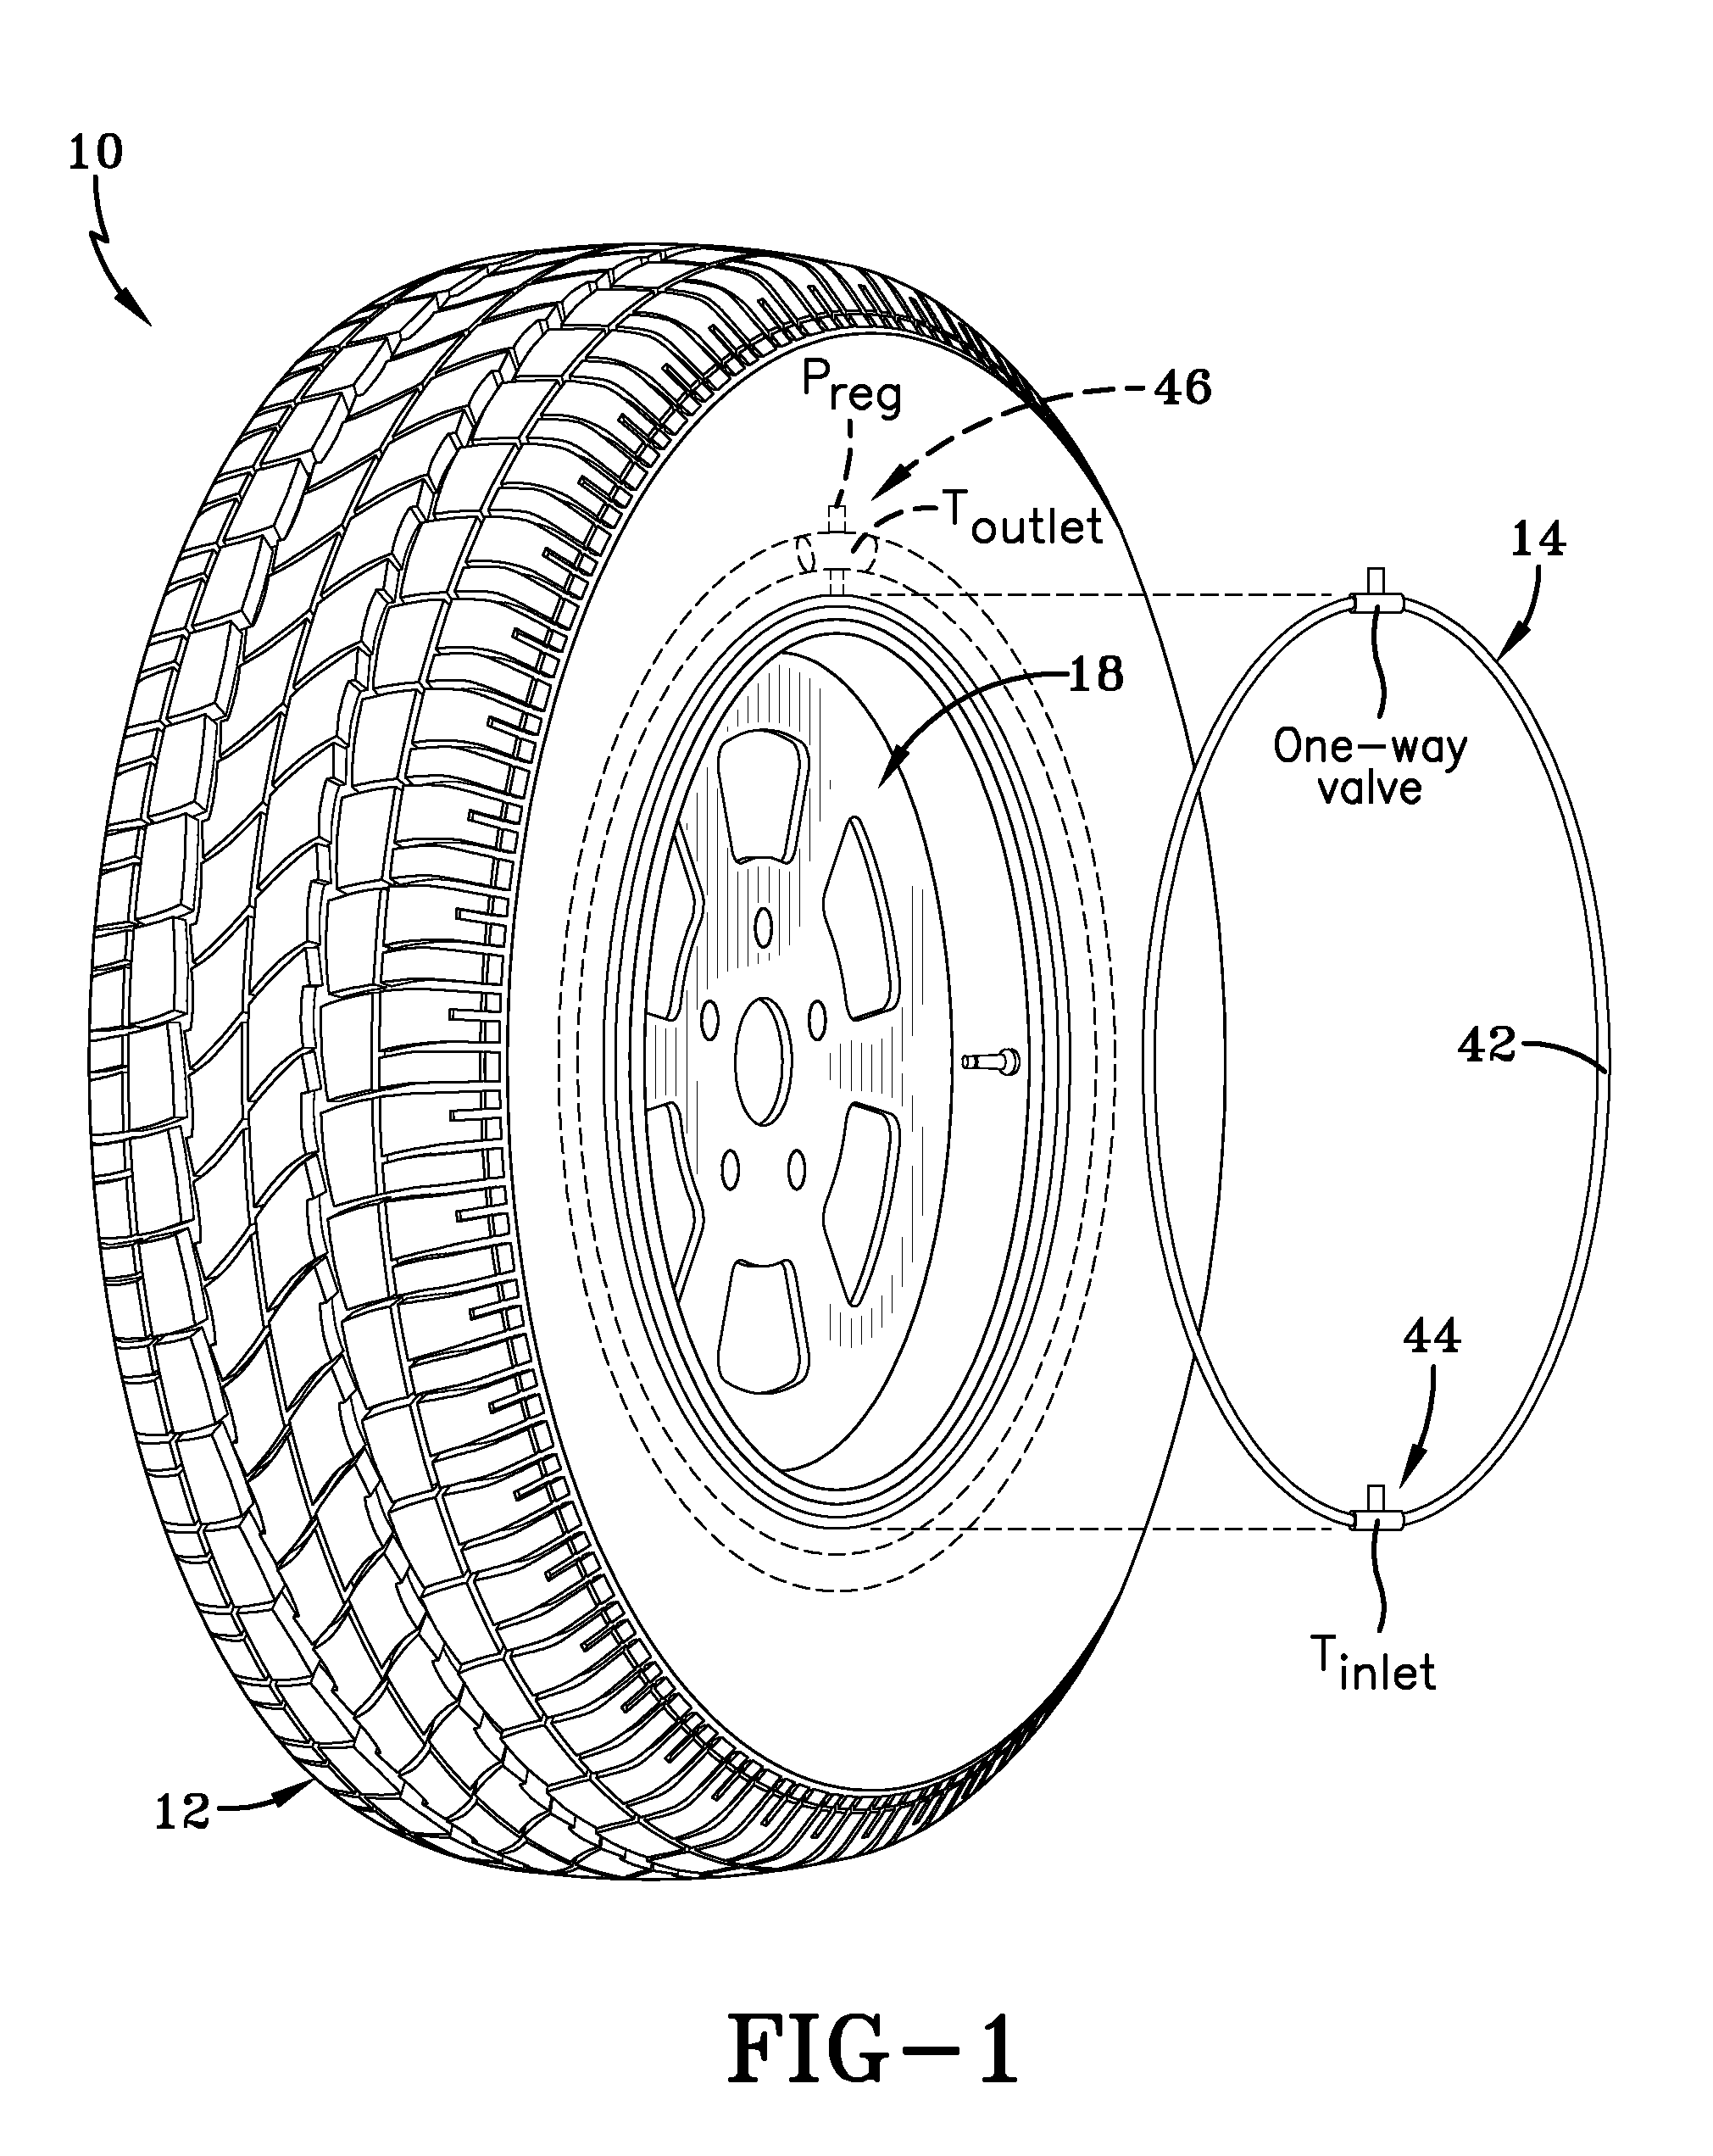 Self-inflating tire assembly